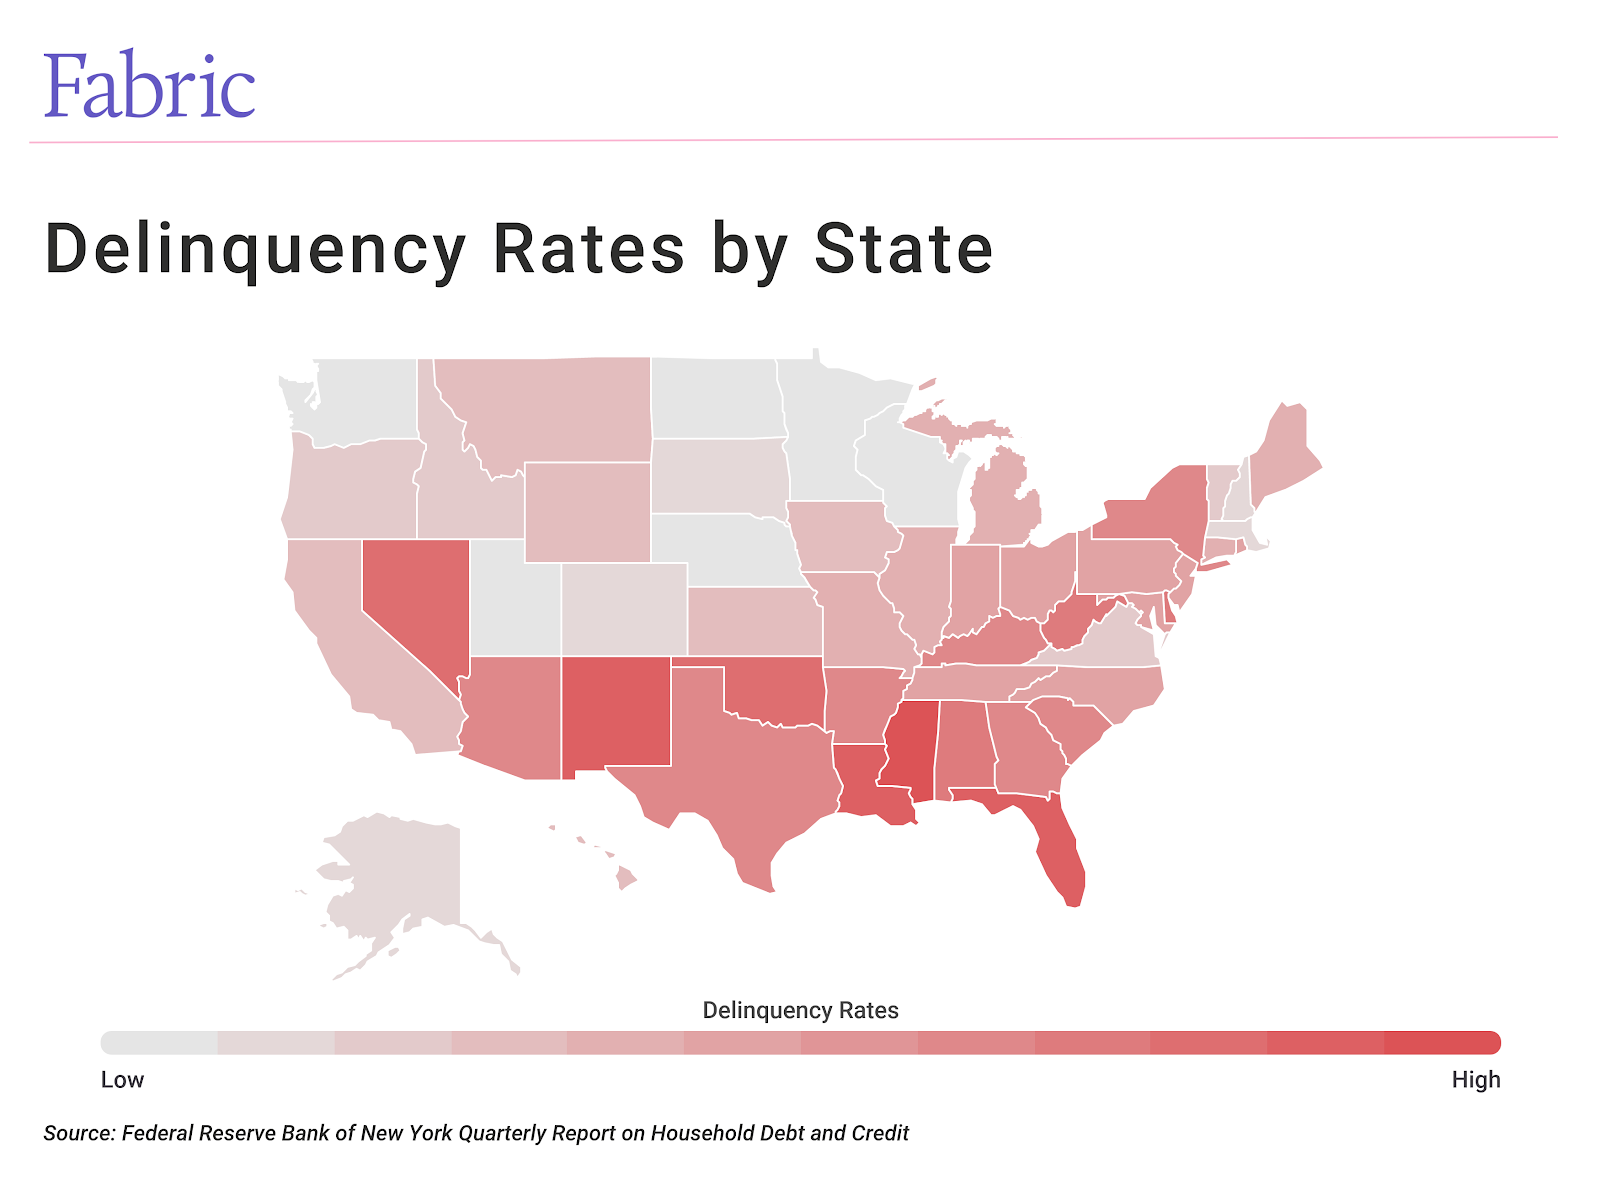 map of U.S. showing delinquency rates by state